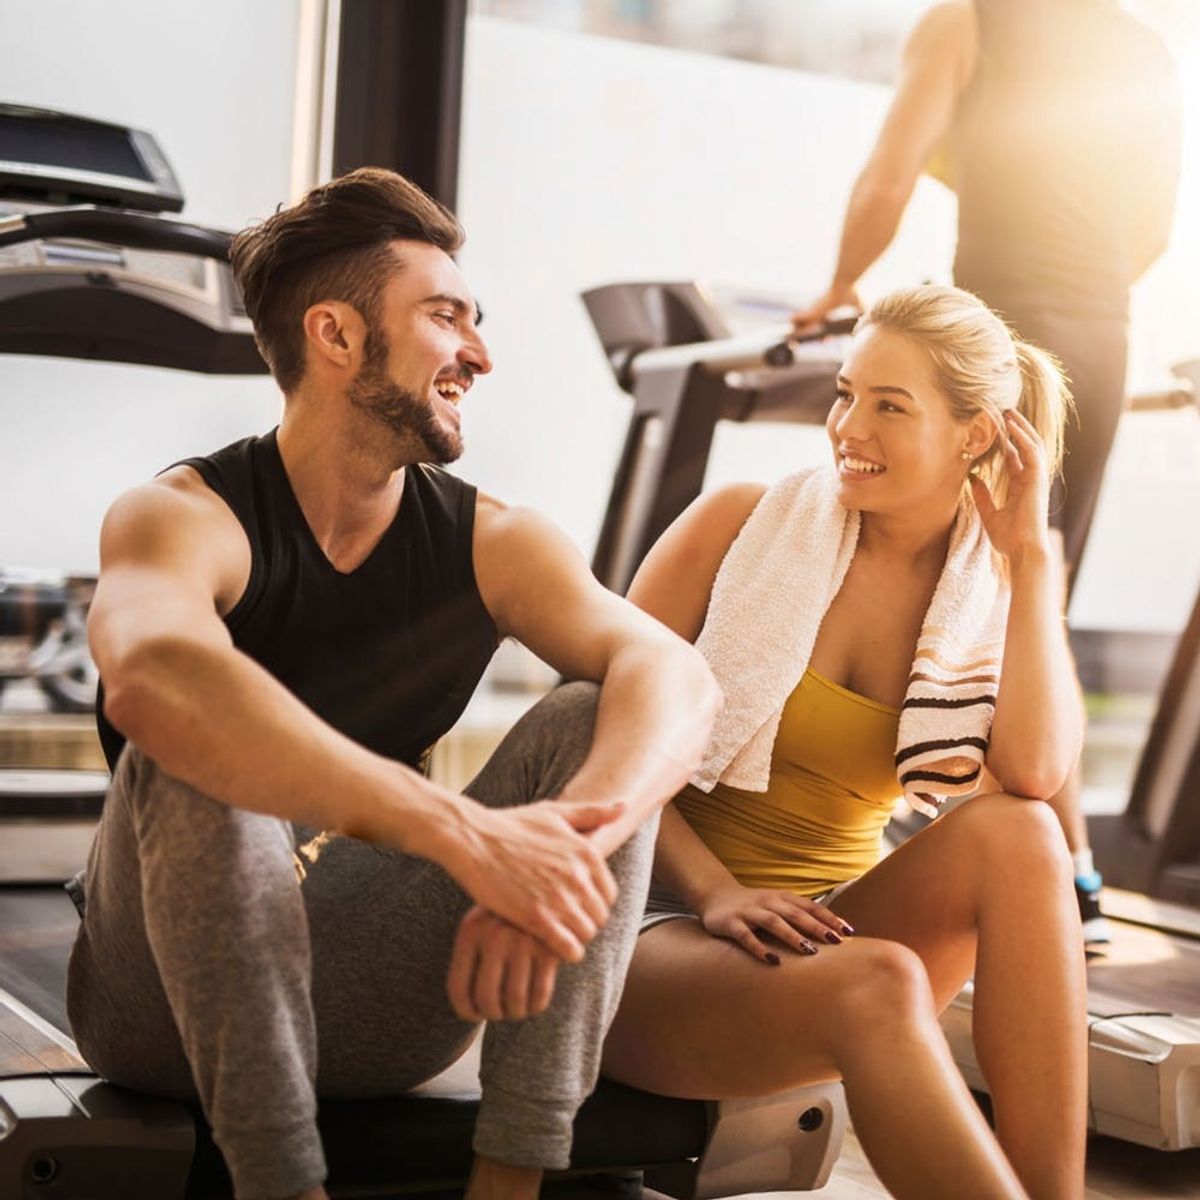 This Is How to Pick Up That Cutie at the Gym